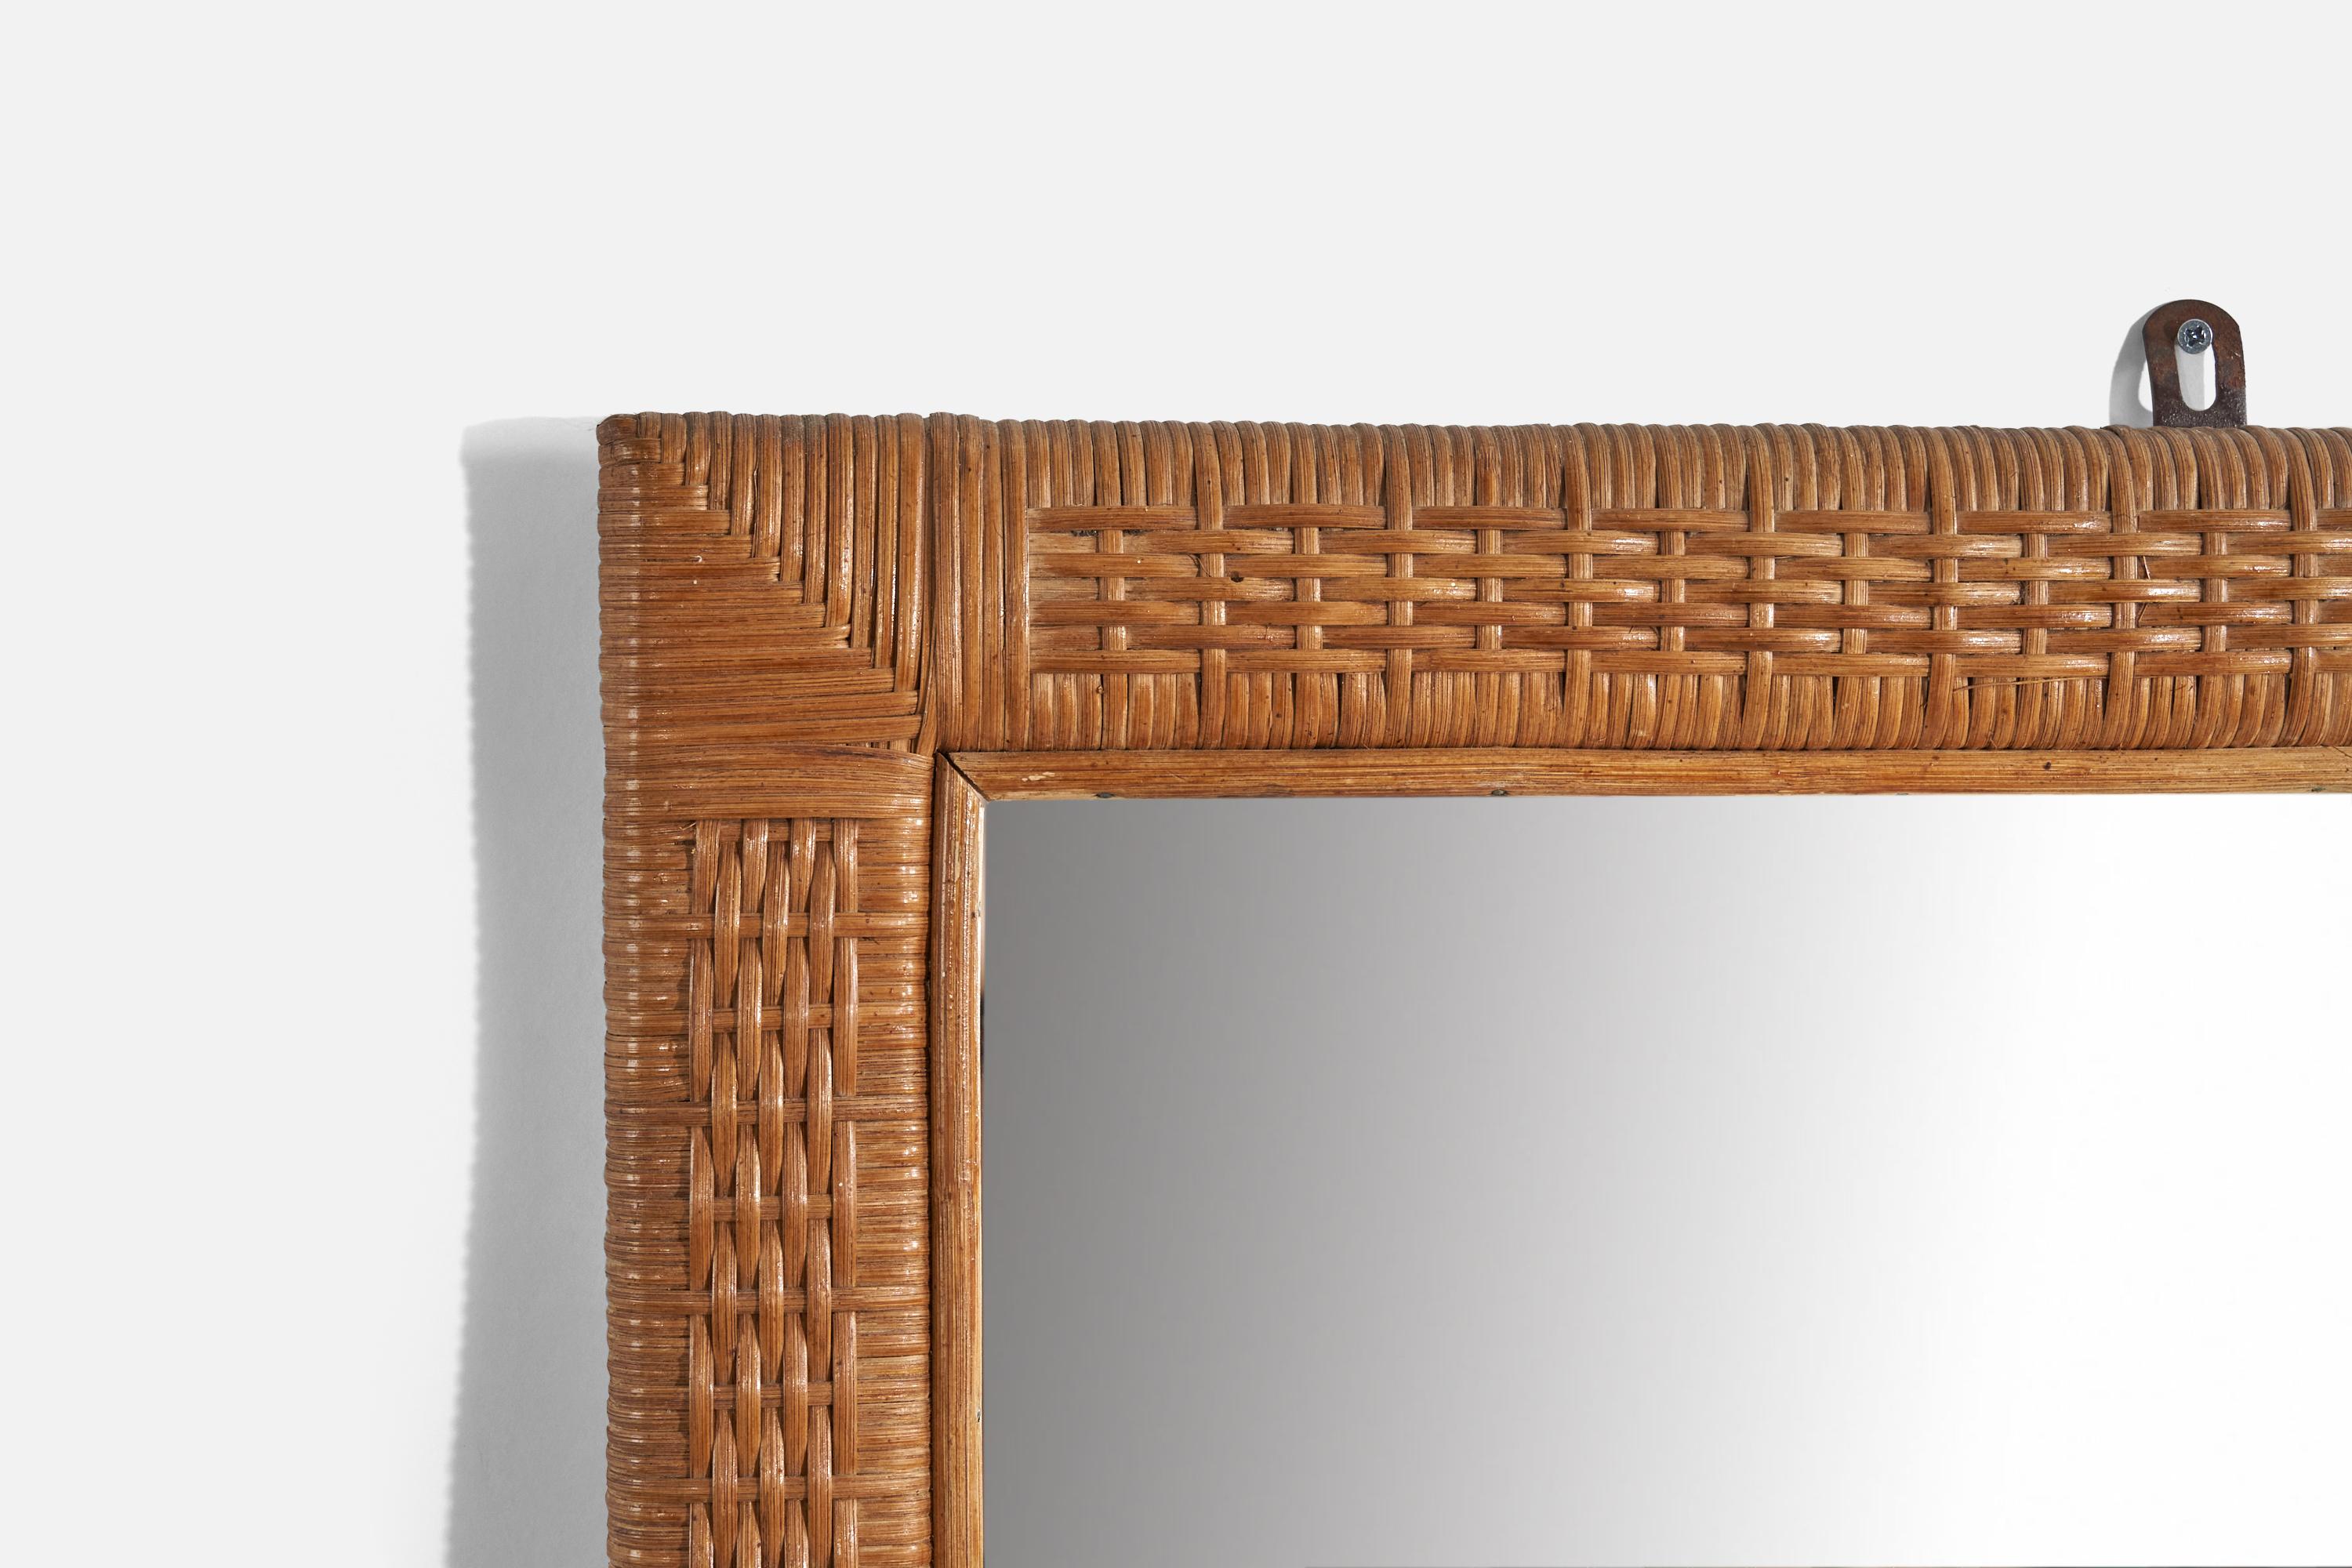 Italian Designer, Rectangular Wall Mirror, Wicker, Mirror, Italy, C. 1950s In Good Condition For Sale In High Point, NC